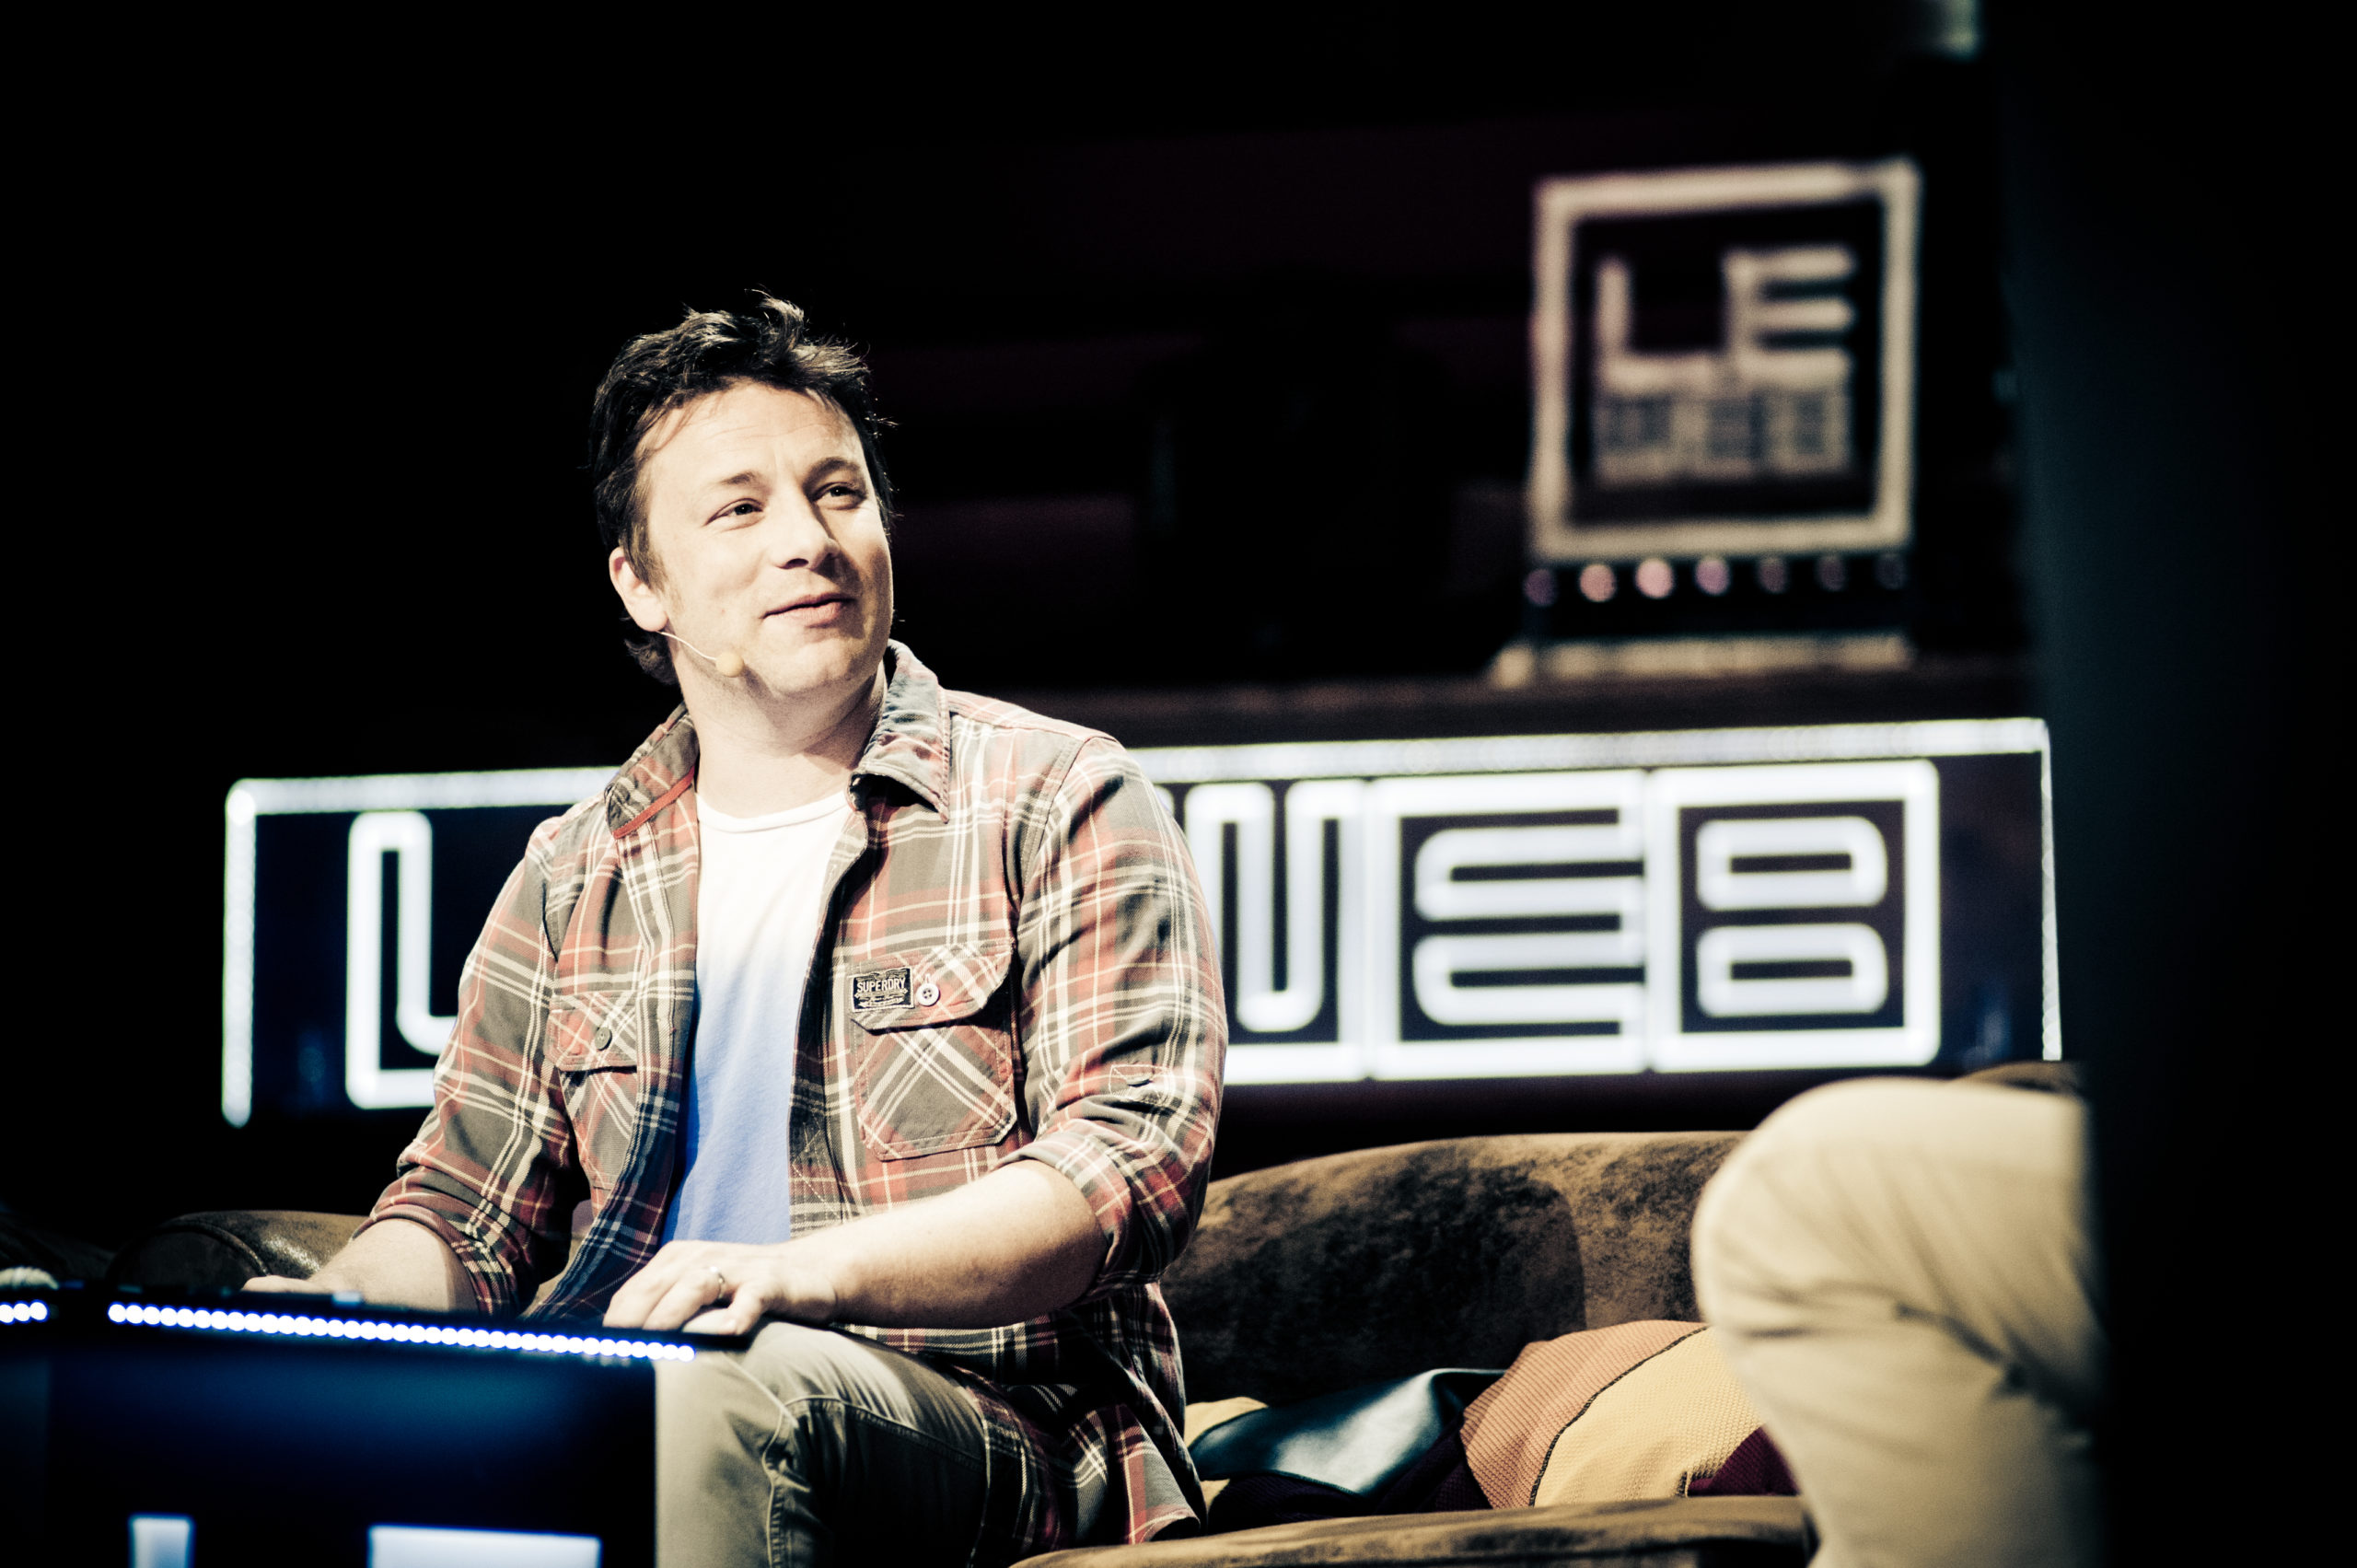 The celebrity chef Jamie Oliver is sitting on a couch. Behind him is a black background that has 2 different versions of the LEWEB logo on it. 